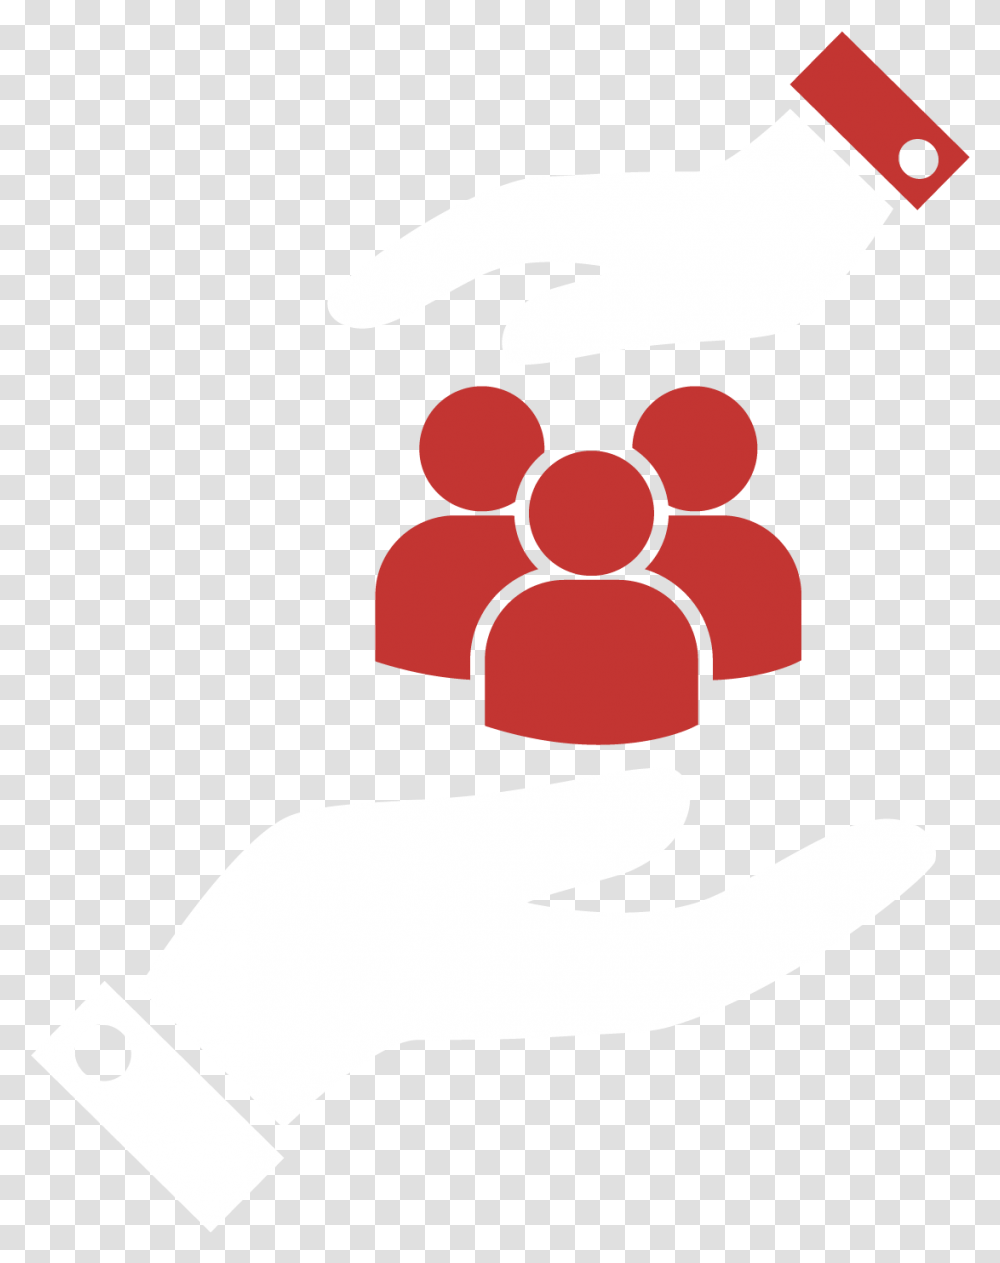 Client And Staff Loyalty Peoples Icon Clipart Full Size Dot, Axe, Hand, Performer, Crowd Transparent Png